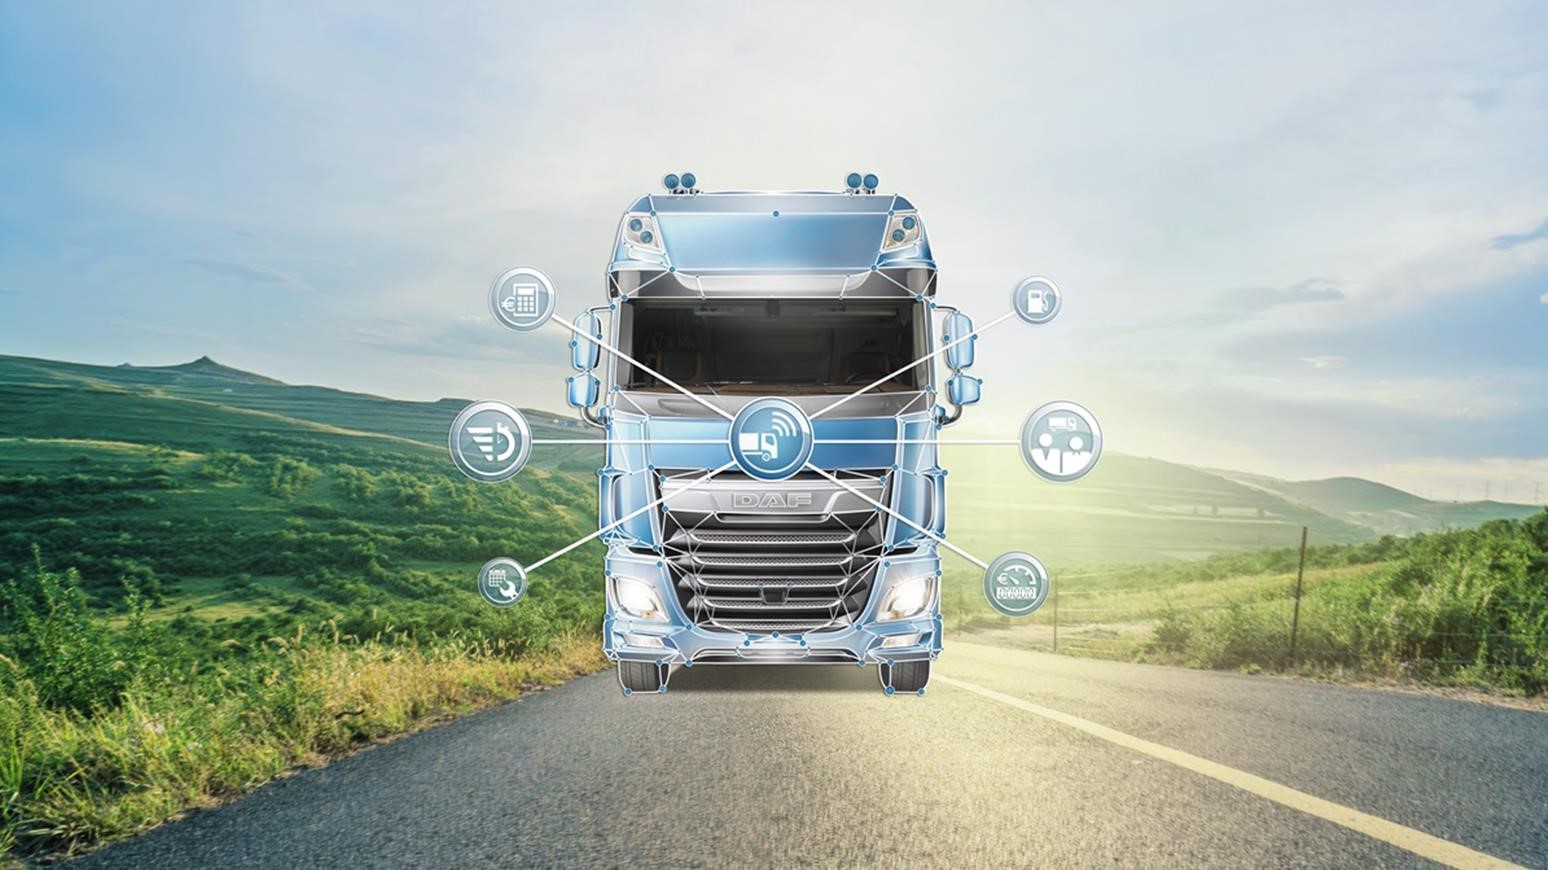 DAF Delivers Valuable Information To Drivers & Fleet Owners With Its Connect & Fleet Services Portals